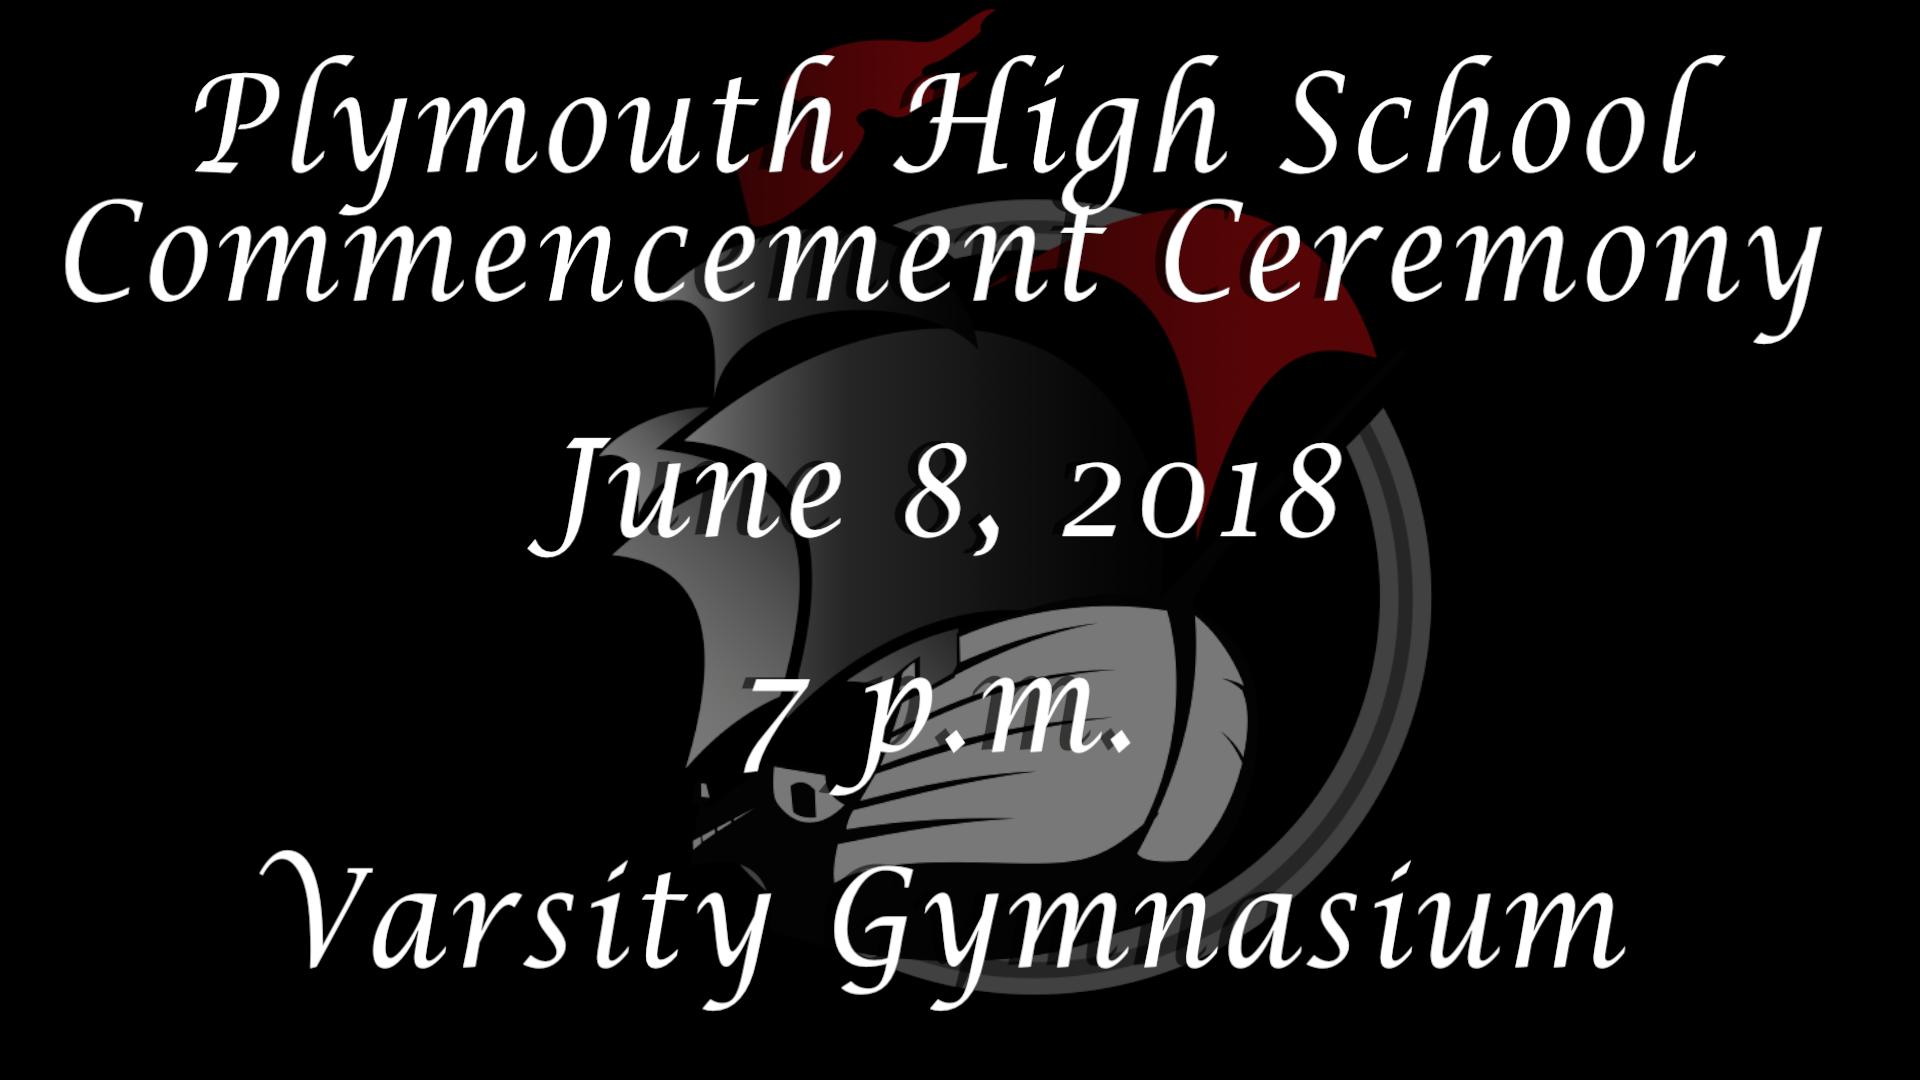 Plymouth High School Commencement Ceremony June 8, 2018 7 p.m. PHS ship logo on black background image